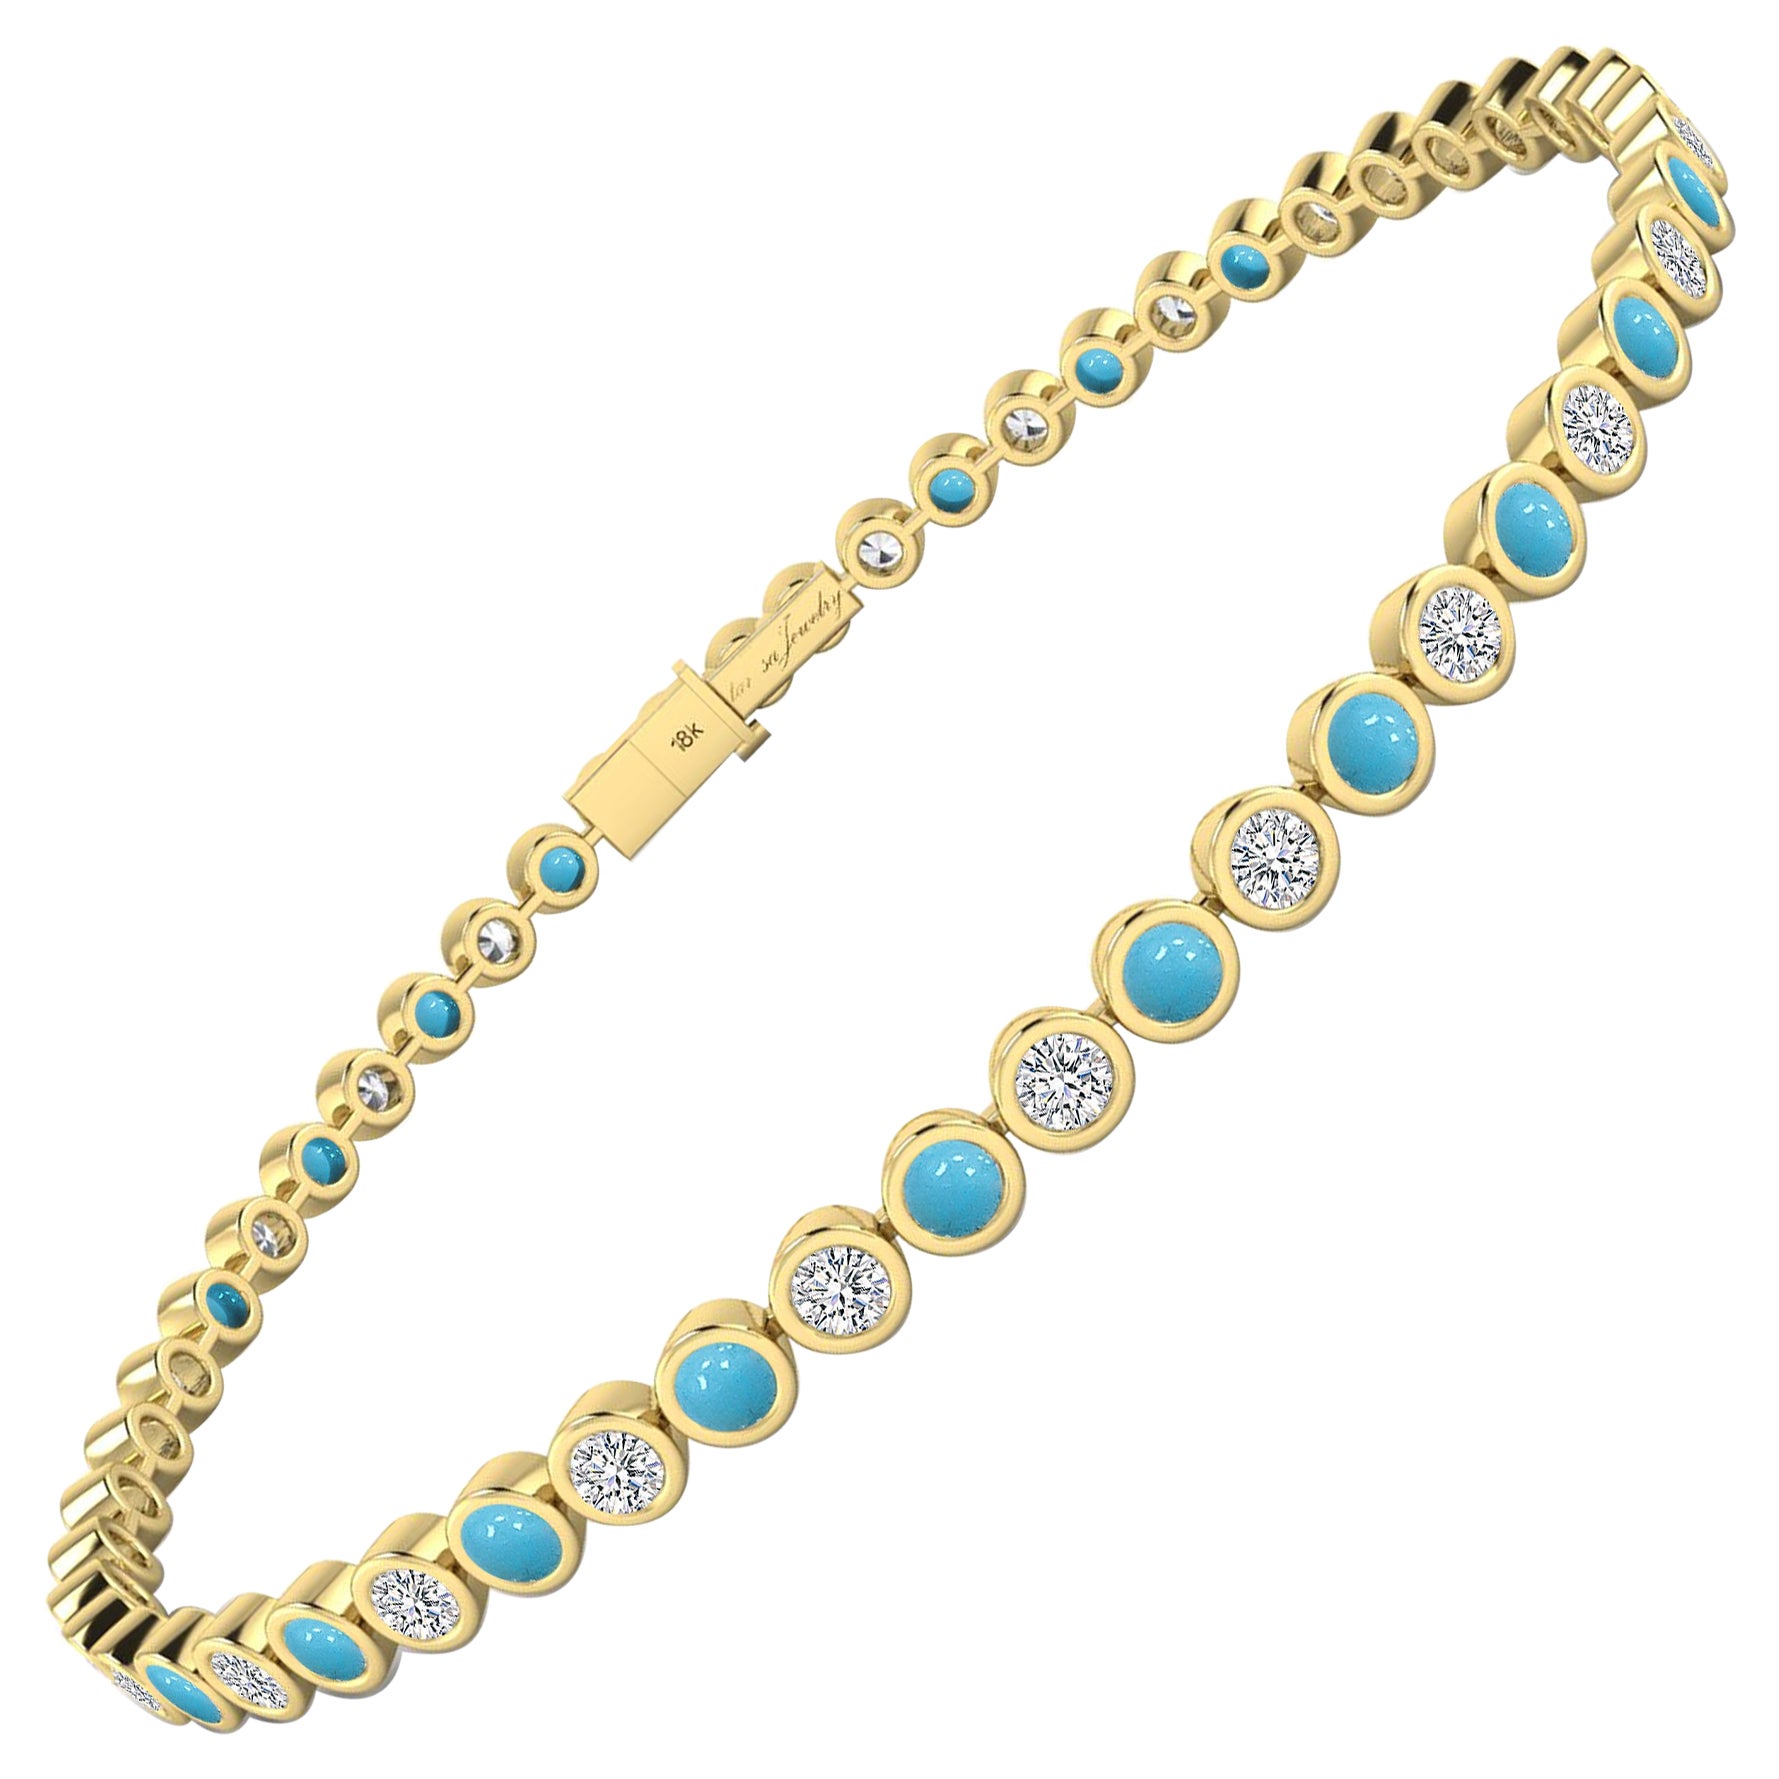 Delphi Gemstone Friendship Bracelet in 18ct Gold Vermeil on Sterling Silver  and Turquoise | Jewellery by Monica Vinader